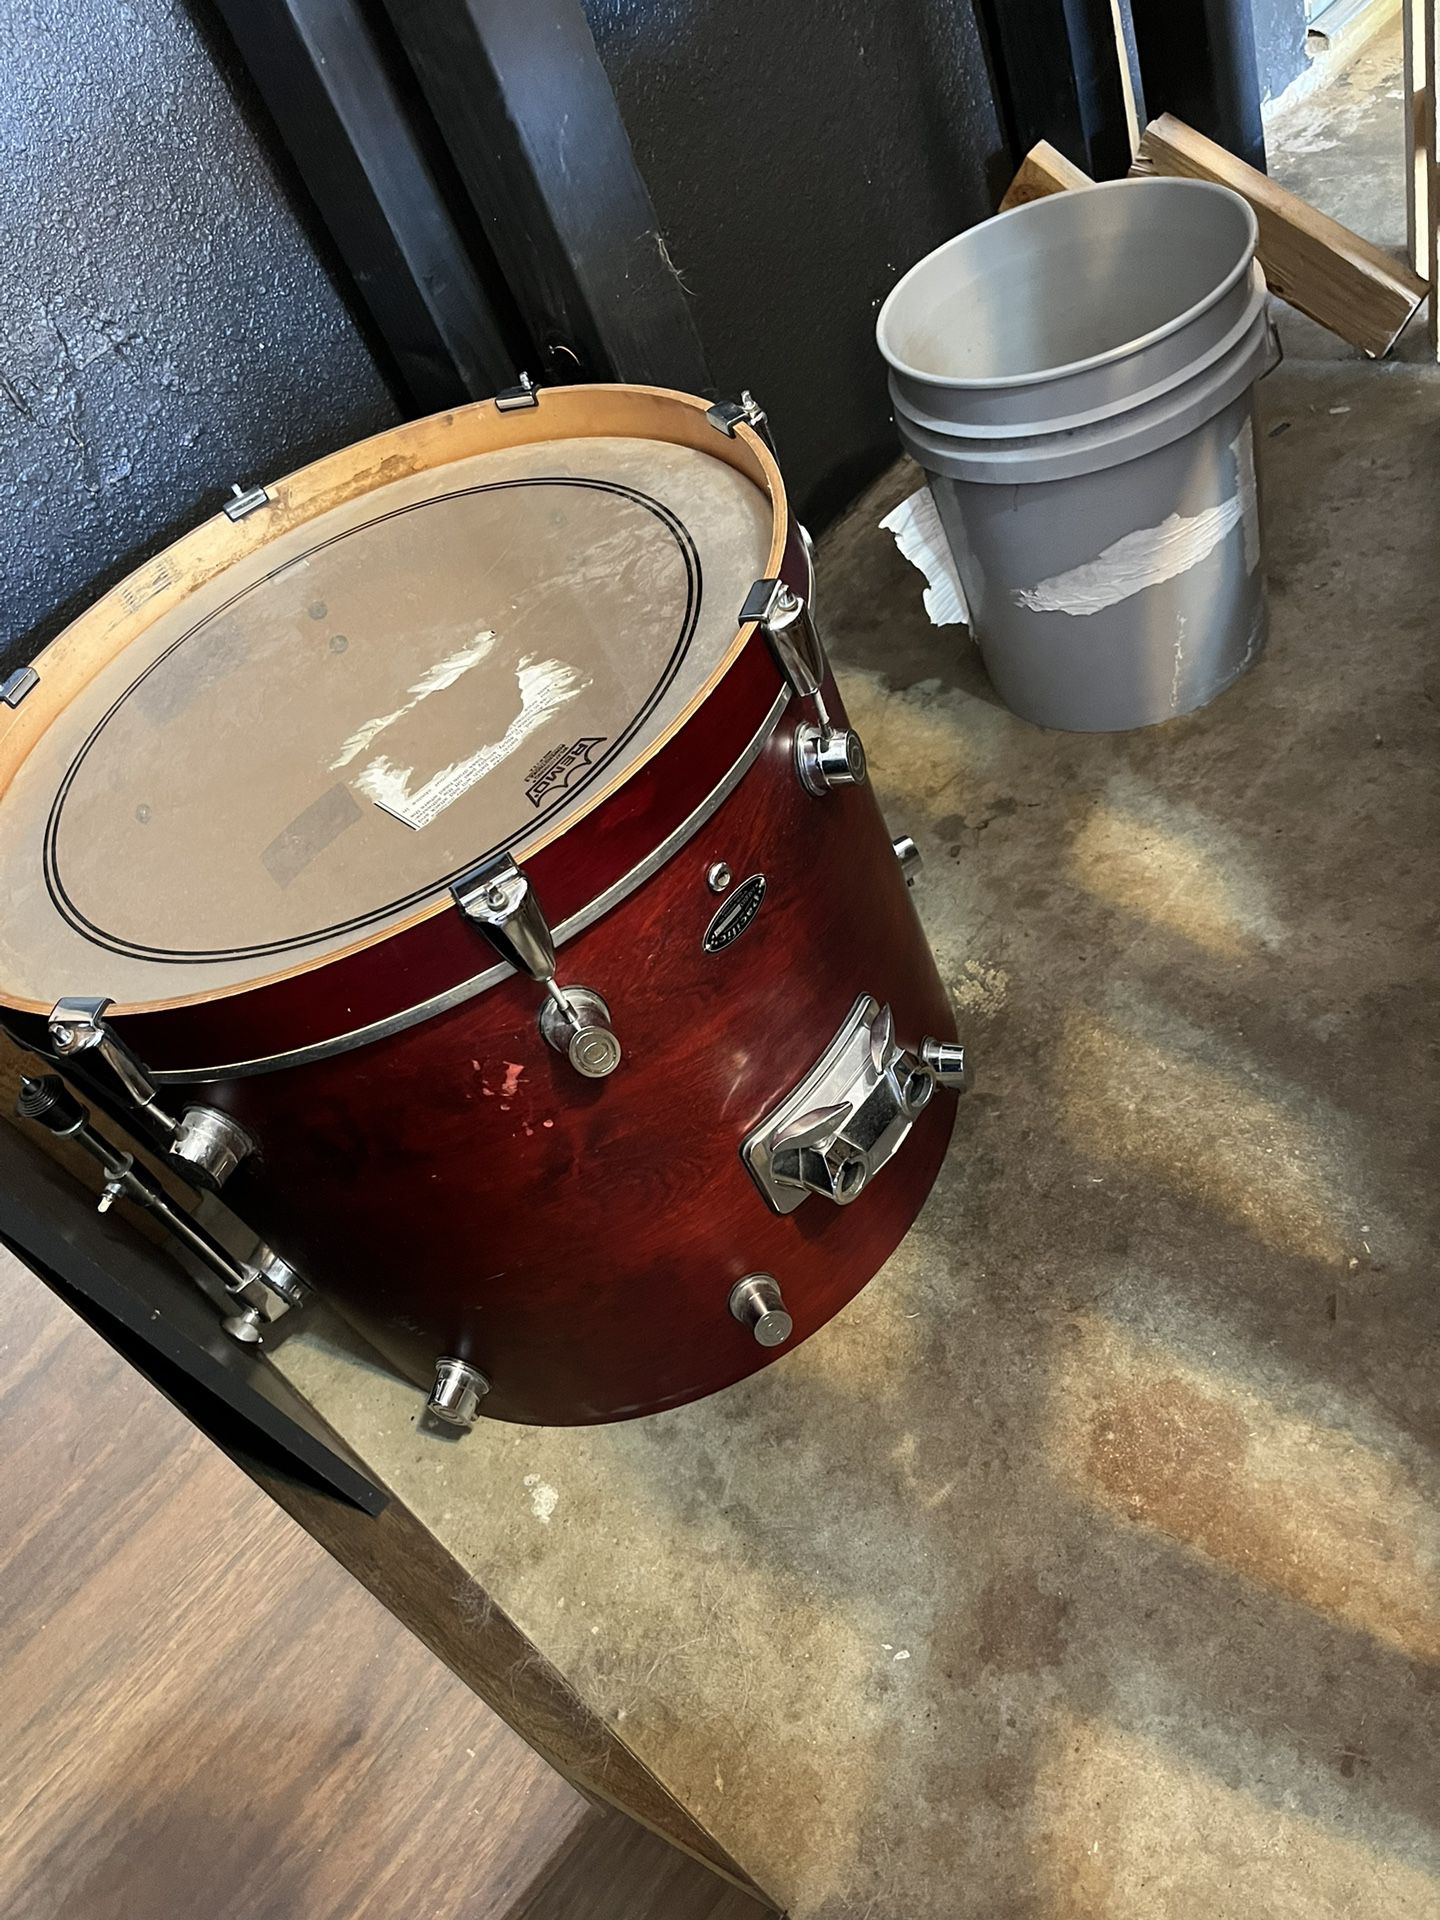 Pacific Floor Tom & Snare Drum W/stand